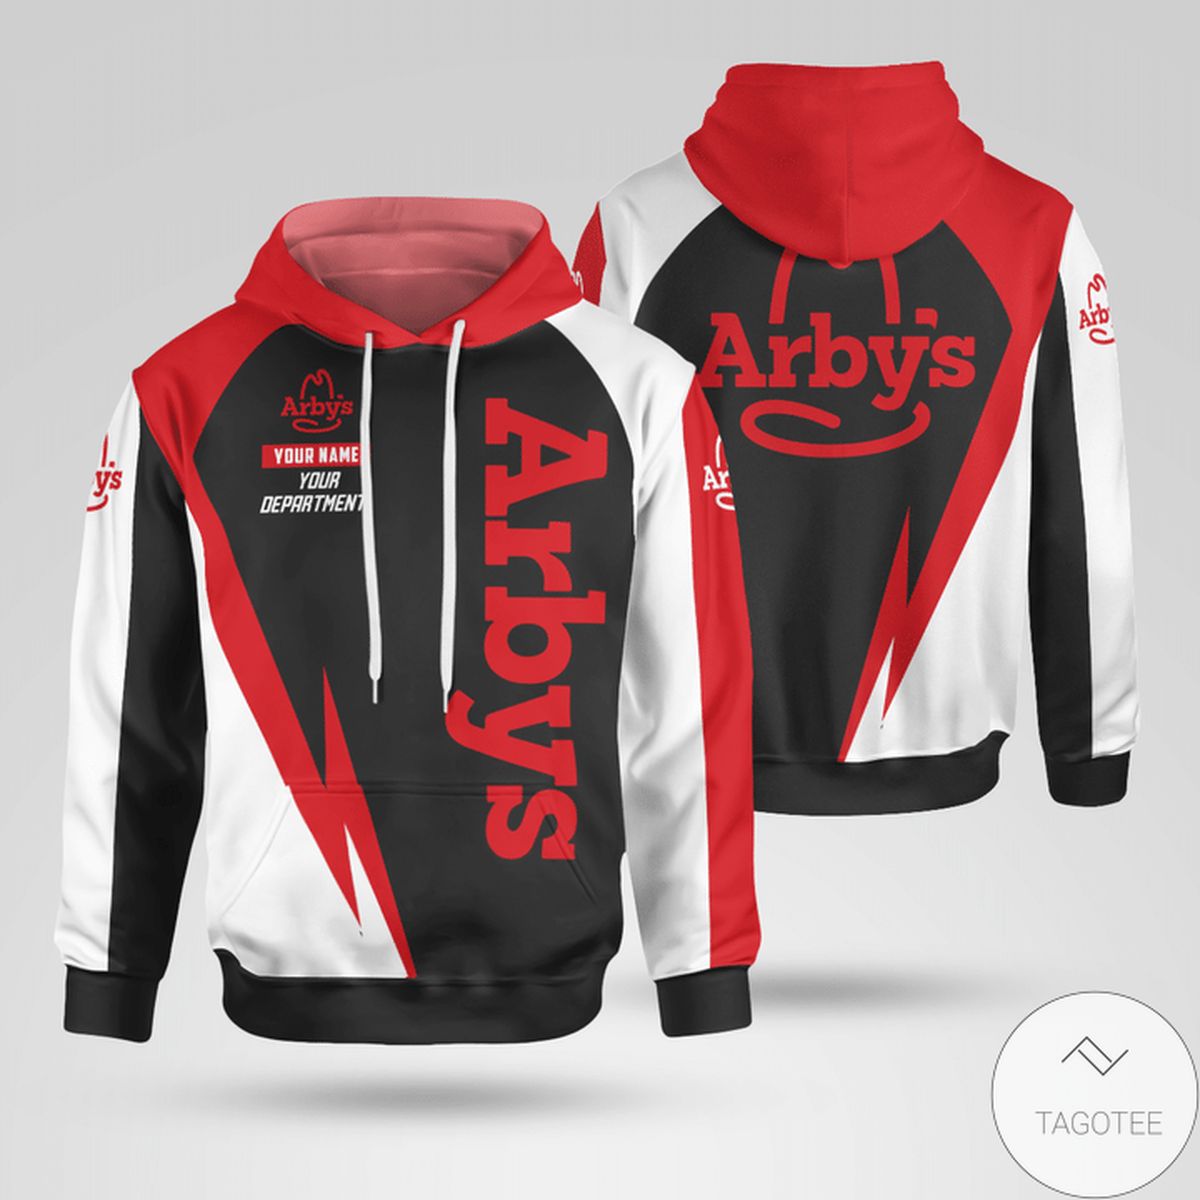 Personalized Arby's Hoodie